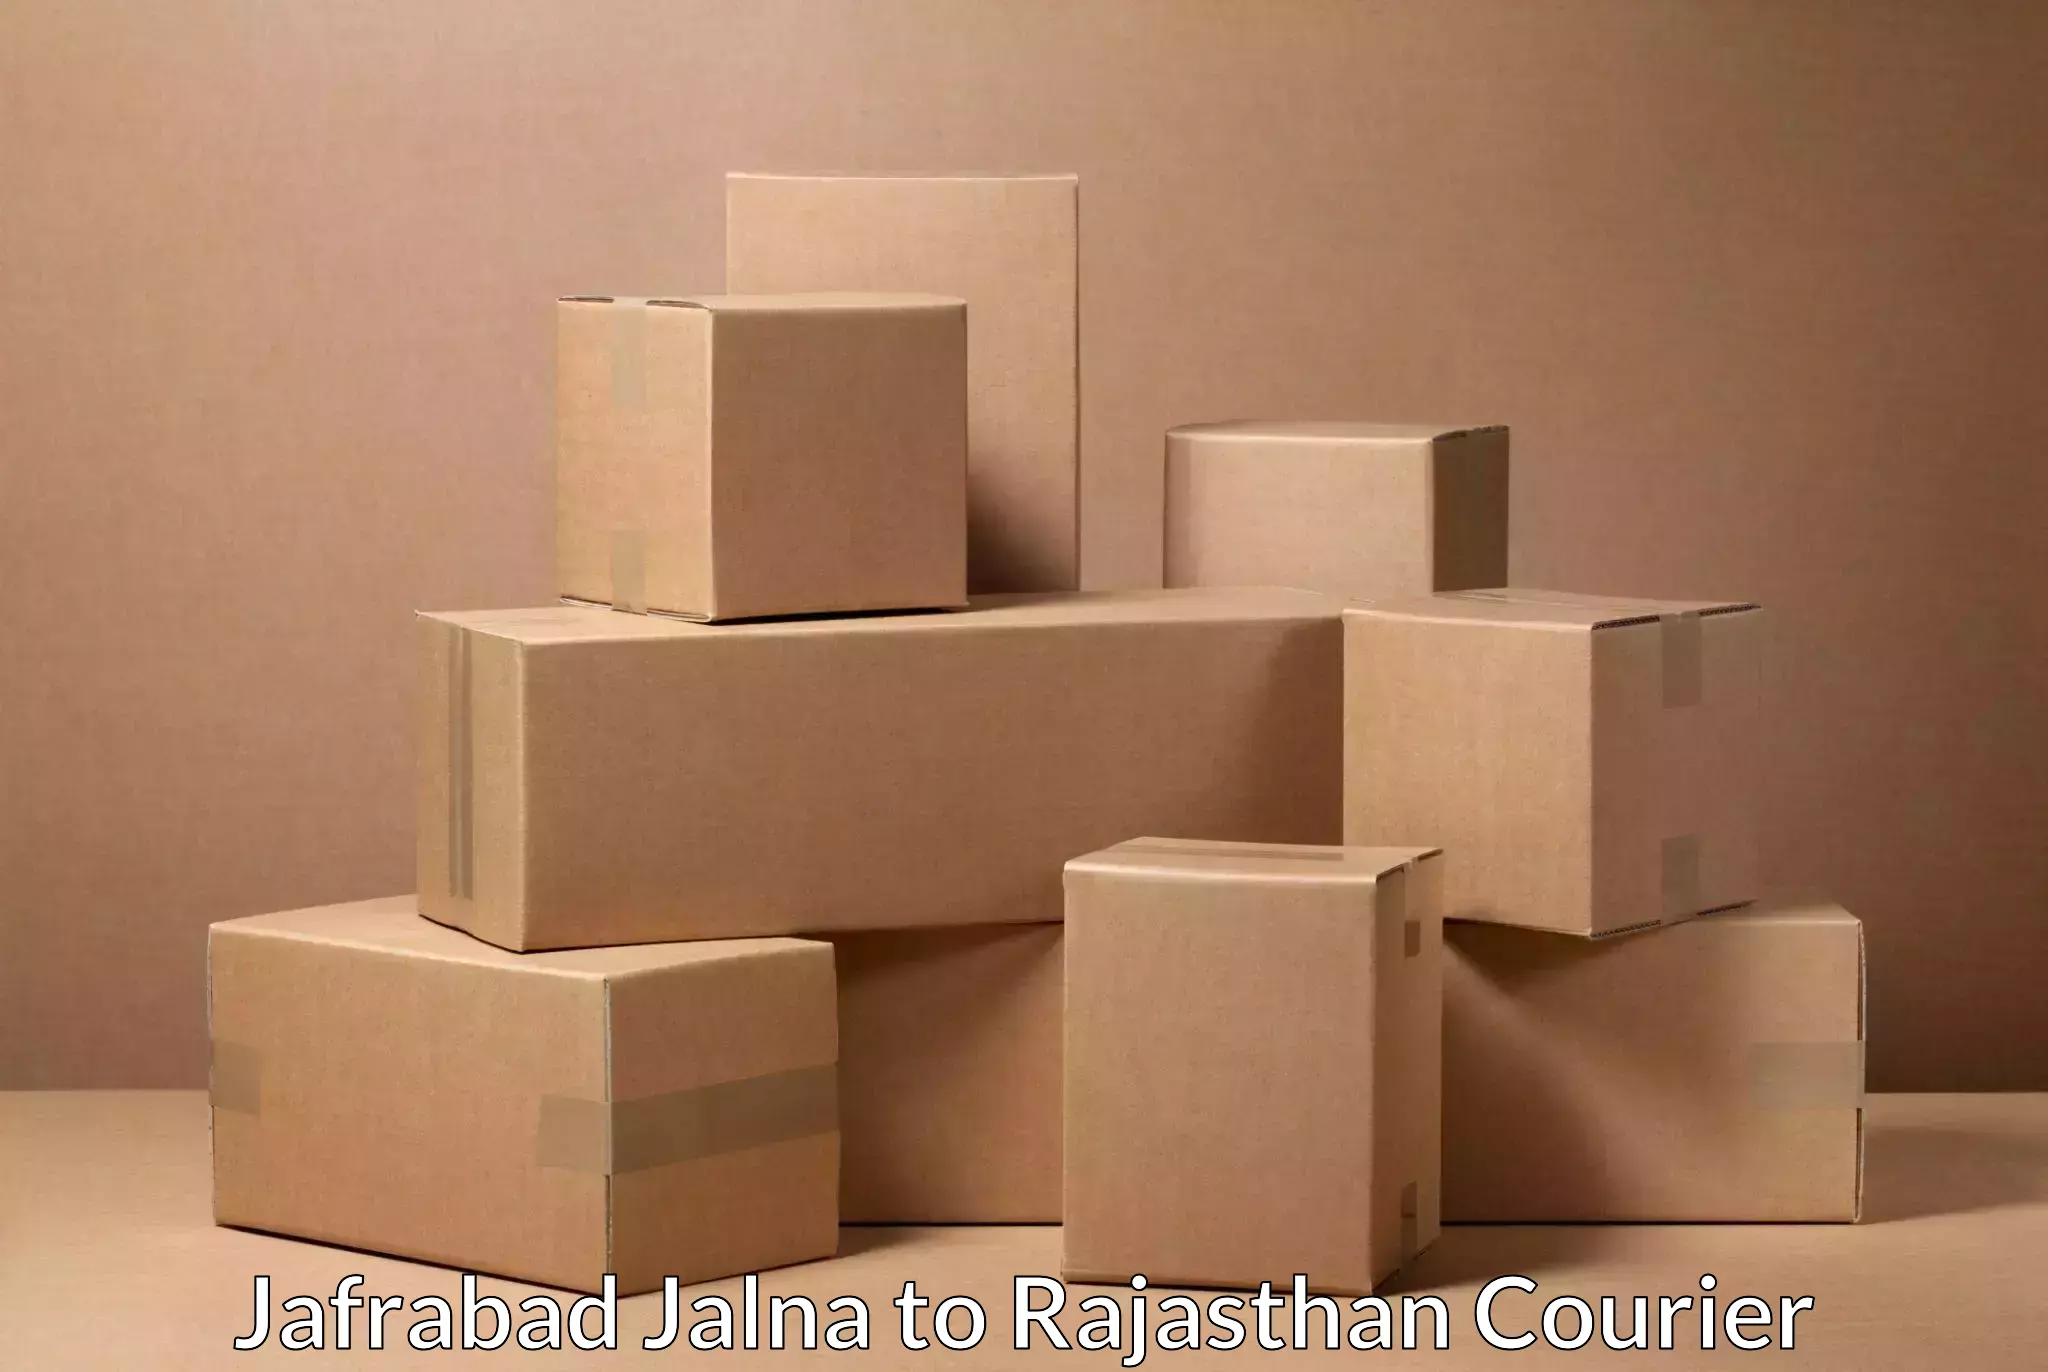 Global shipping solutions Jafrabad Jalna to Rajasthan